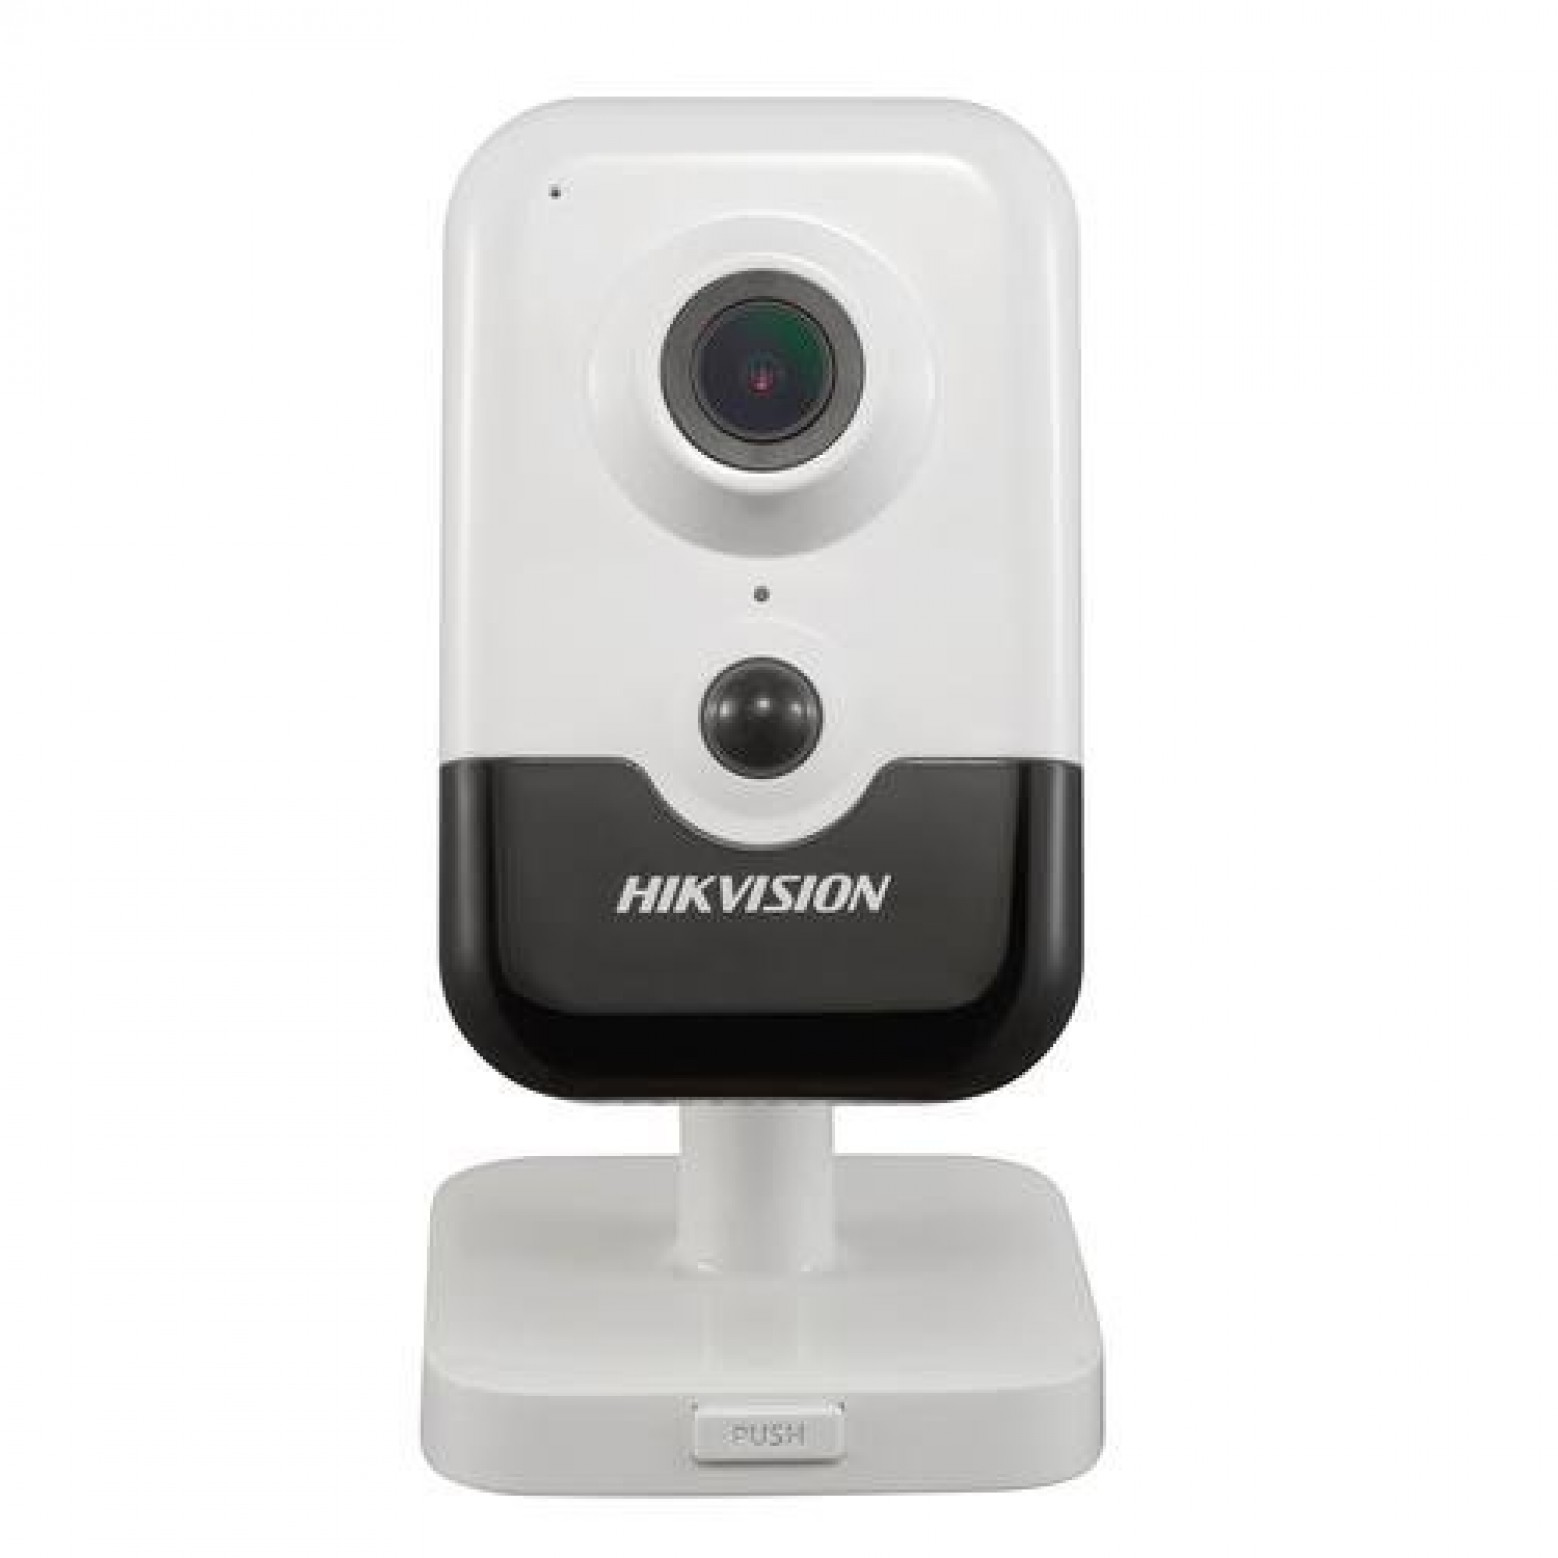 Hikvision DS-2CD2443G0-IW WiFi Cube camera 4 Megapixel